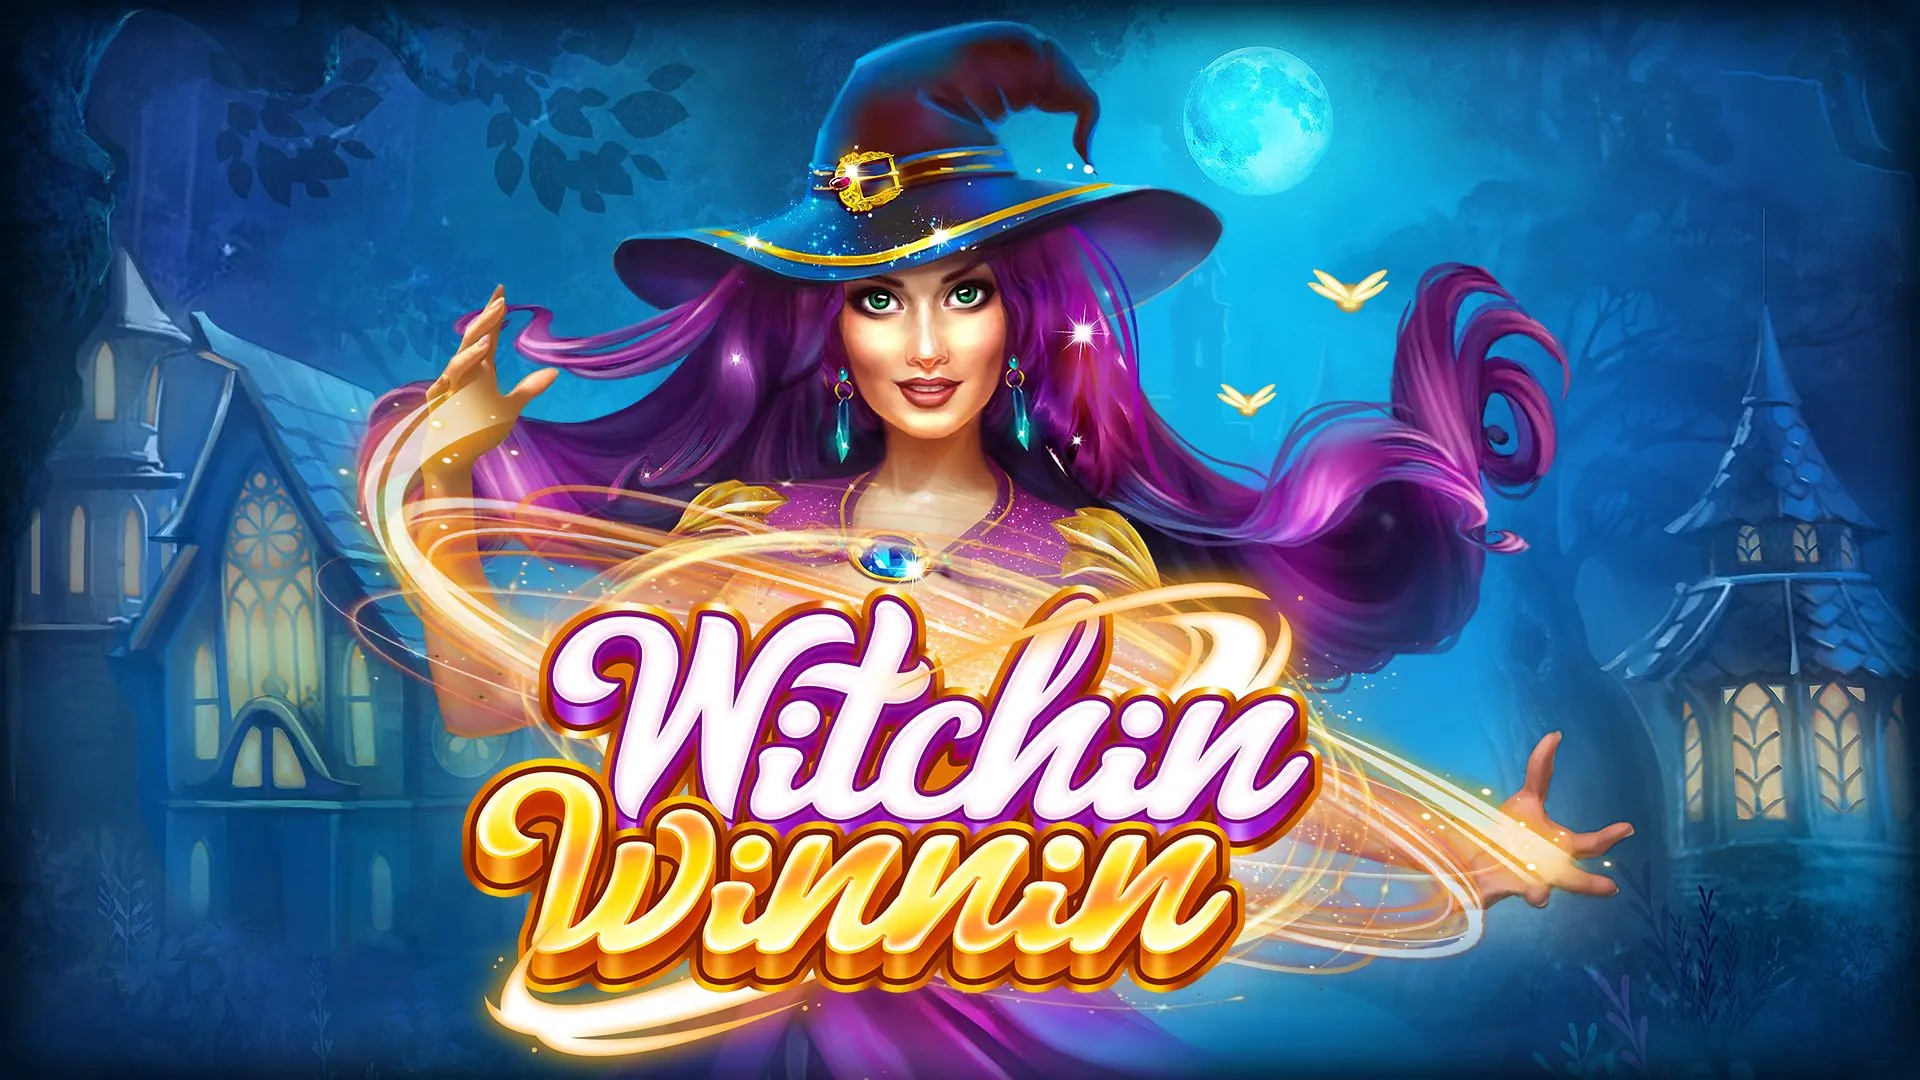 Witchin Winnin is Live now!